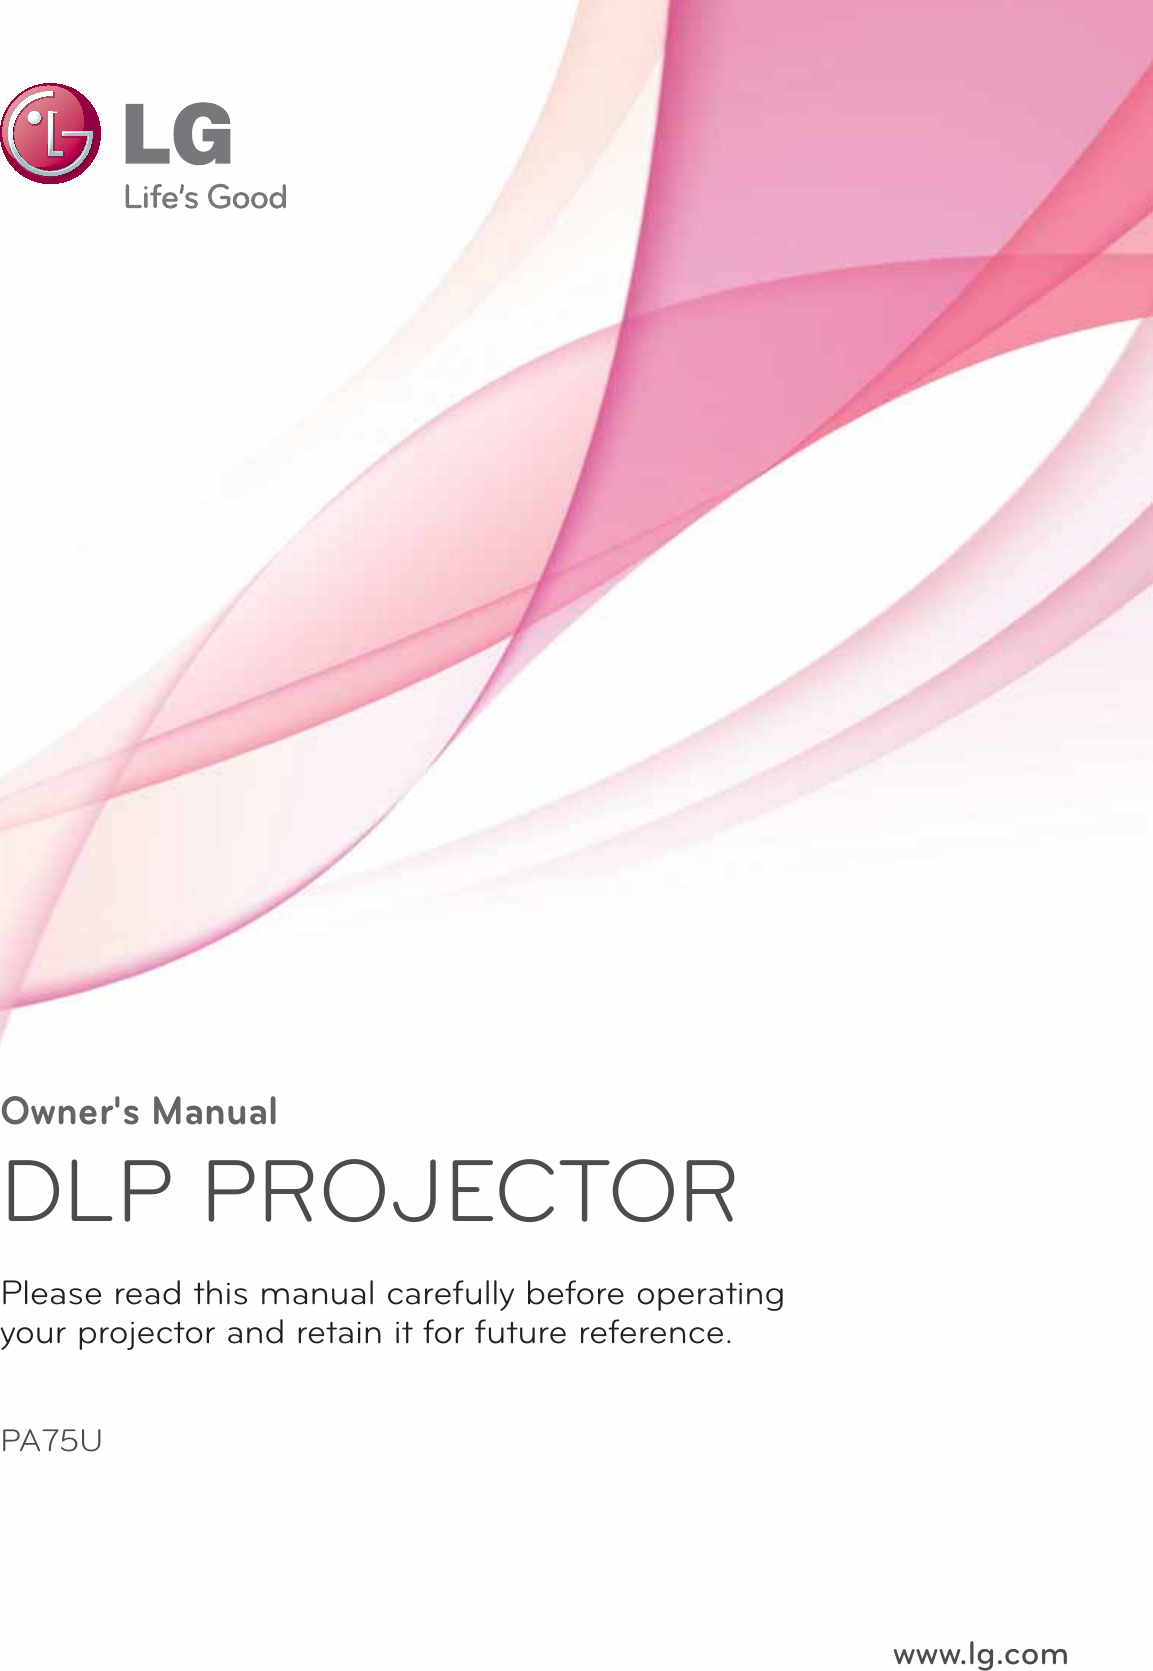 Owner&apos;s ManualDLP PROJECTORPA75UPlease read this manual carefully before operatingyour projector and retain it for future reference.www.lg.com